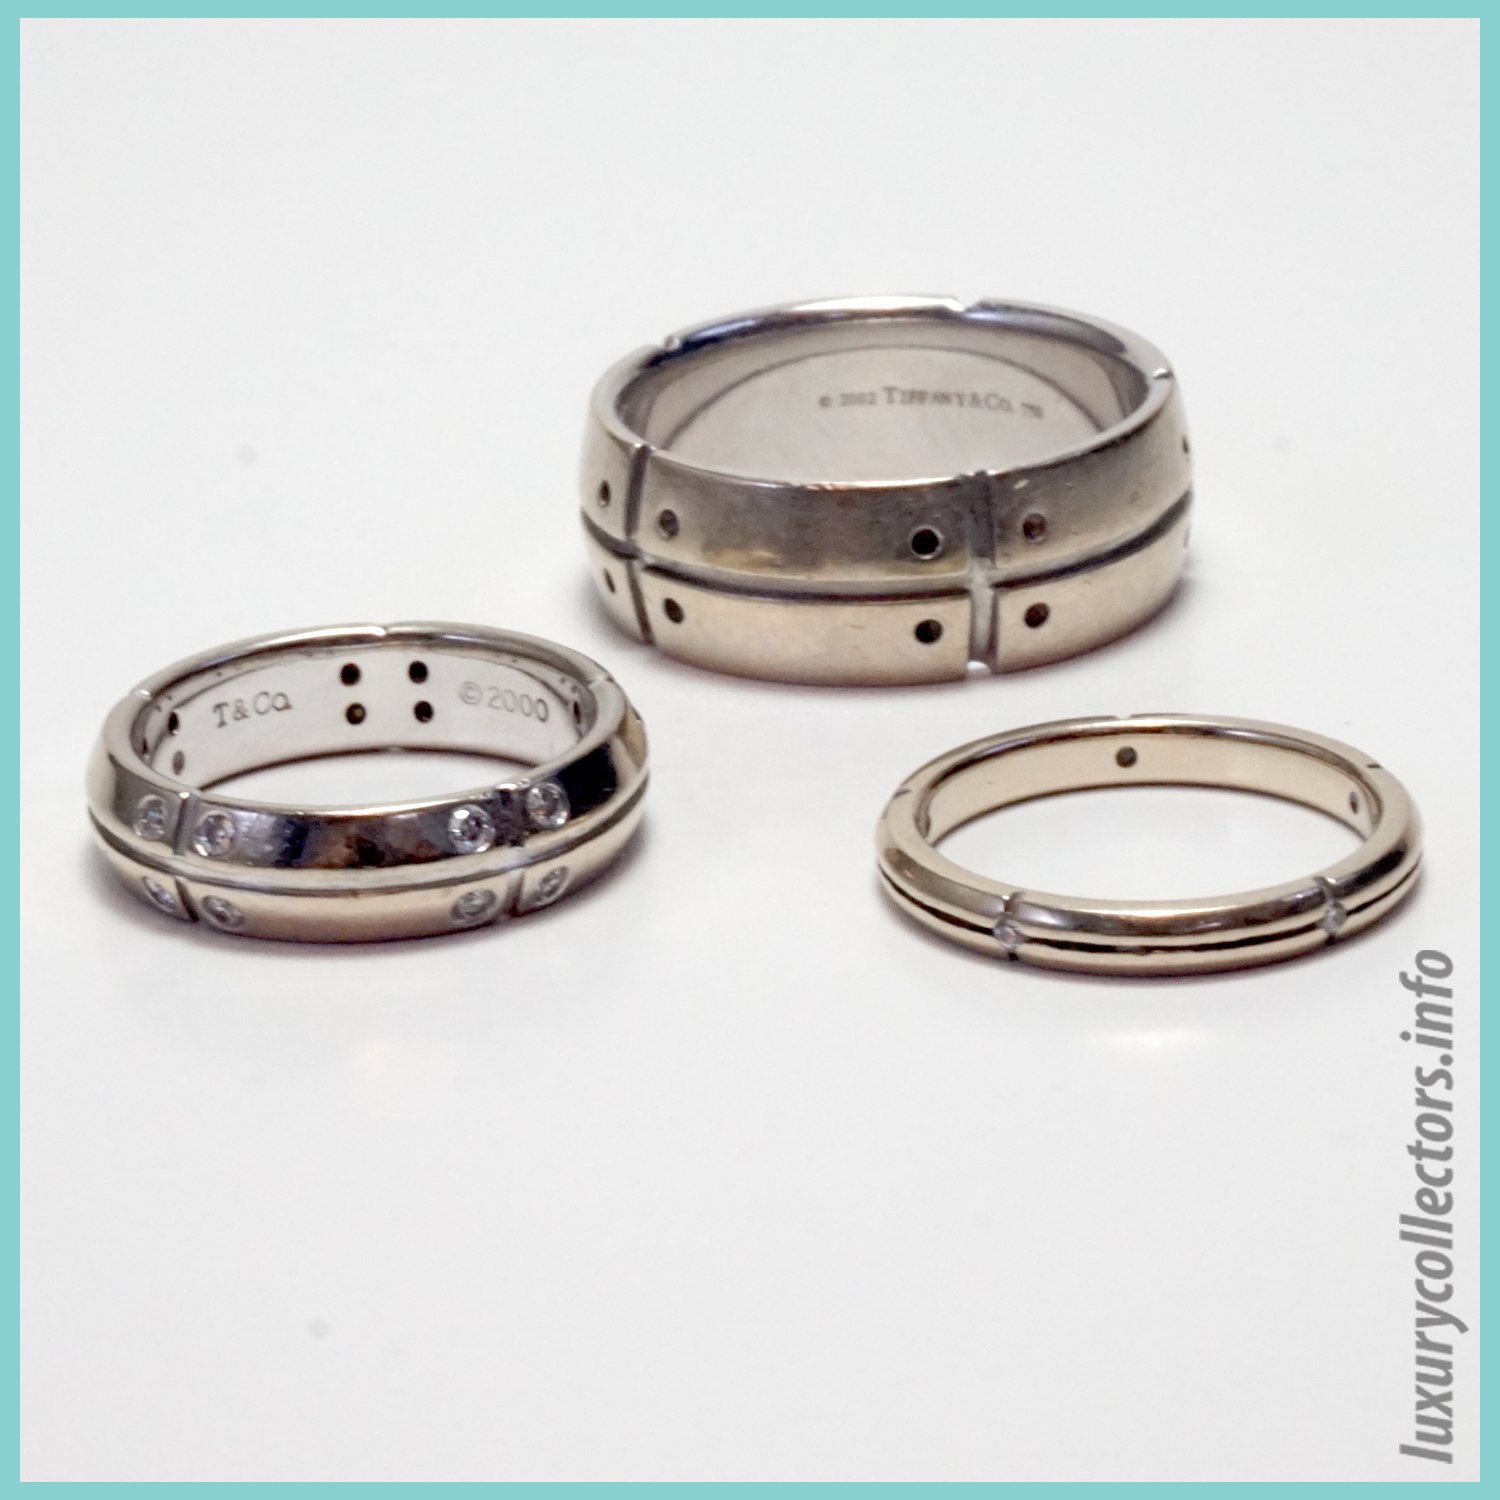 Comparison of three sizes of rings Tiffany & and Co. Streamerica 18k 750 White Gold Double Ring Diamonds 2000 Wedding Bands